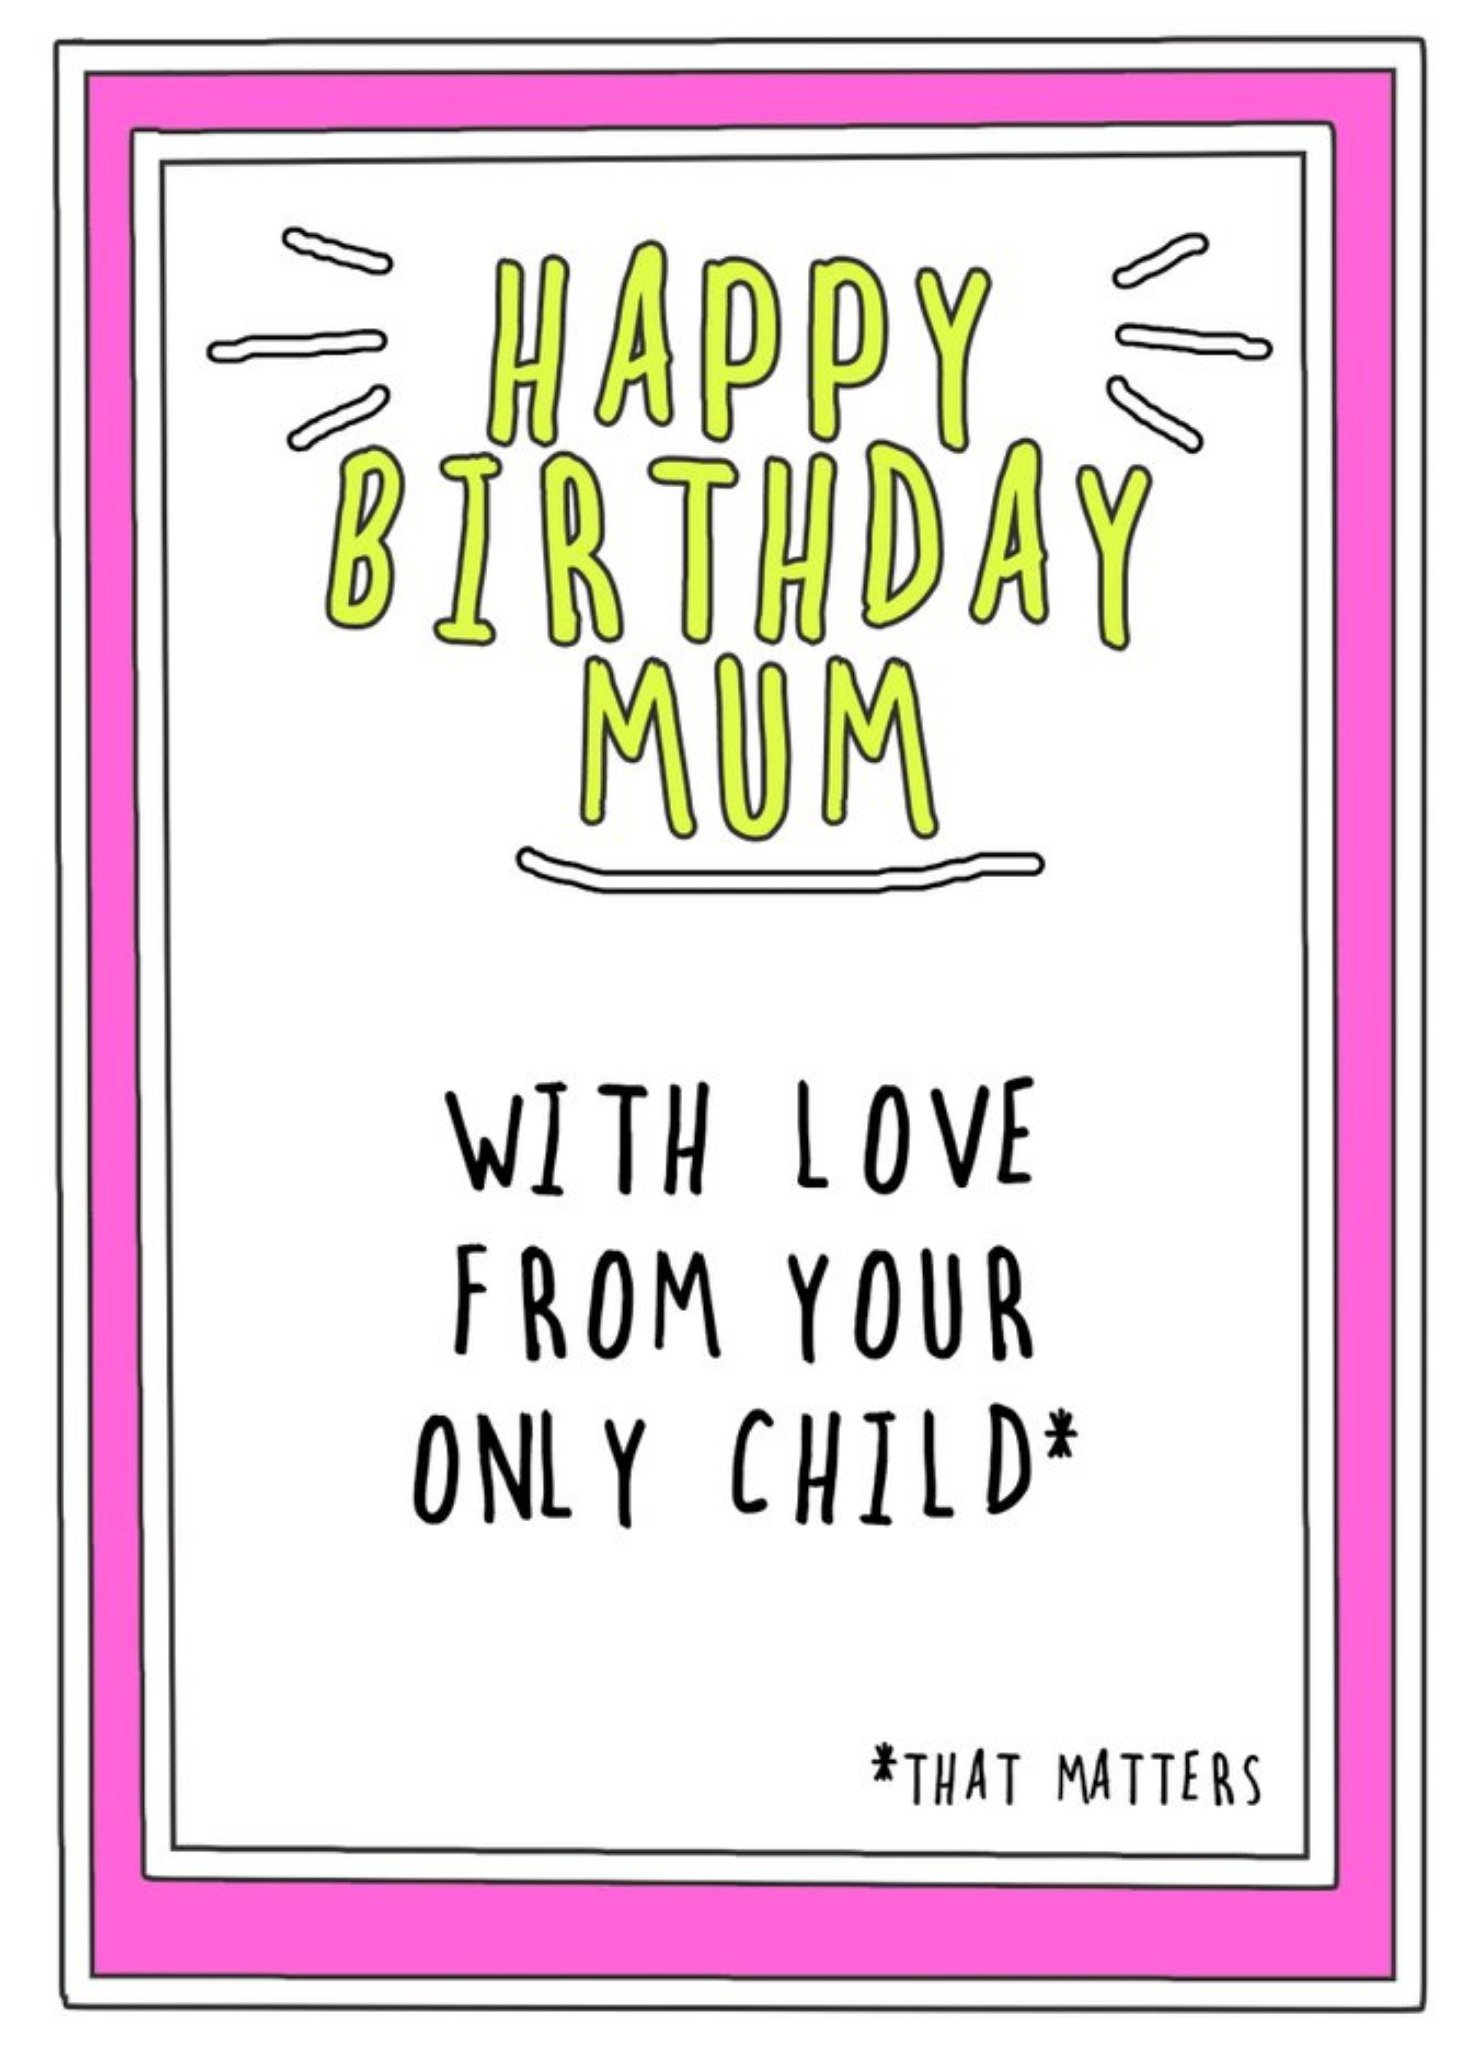 Go La La Humourous Handwritten Text With A Pink Border Mum Birthday Card, Large